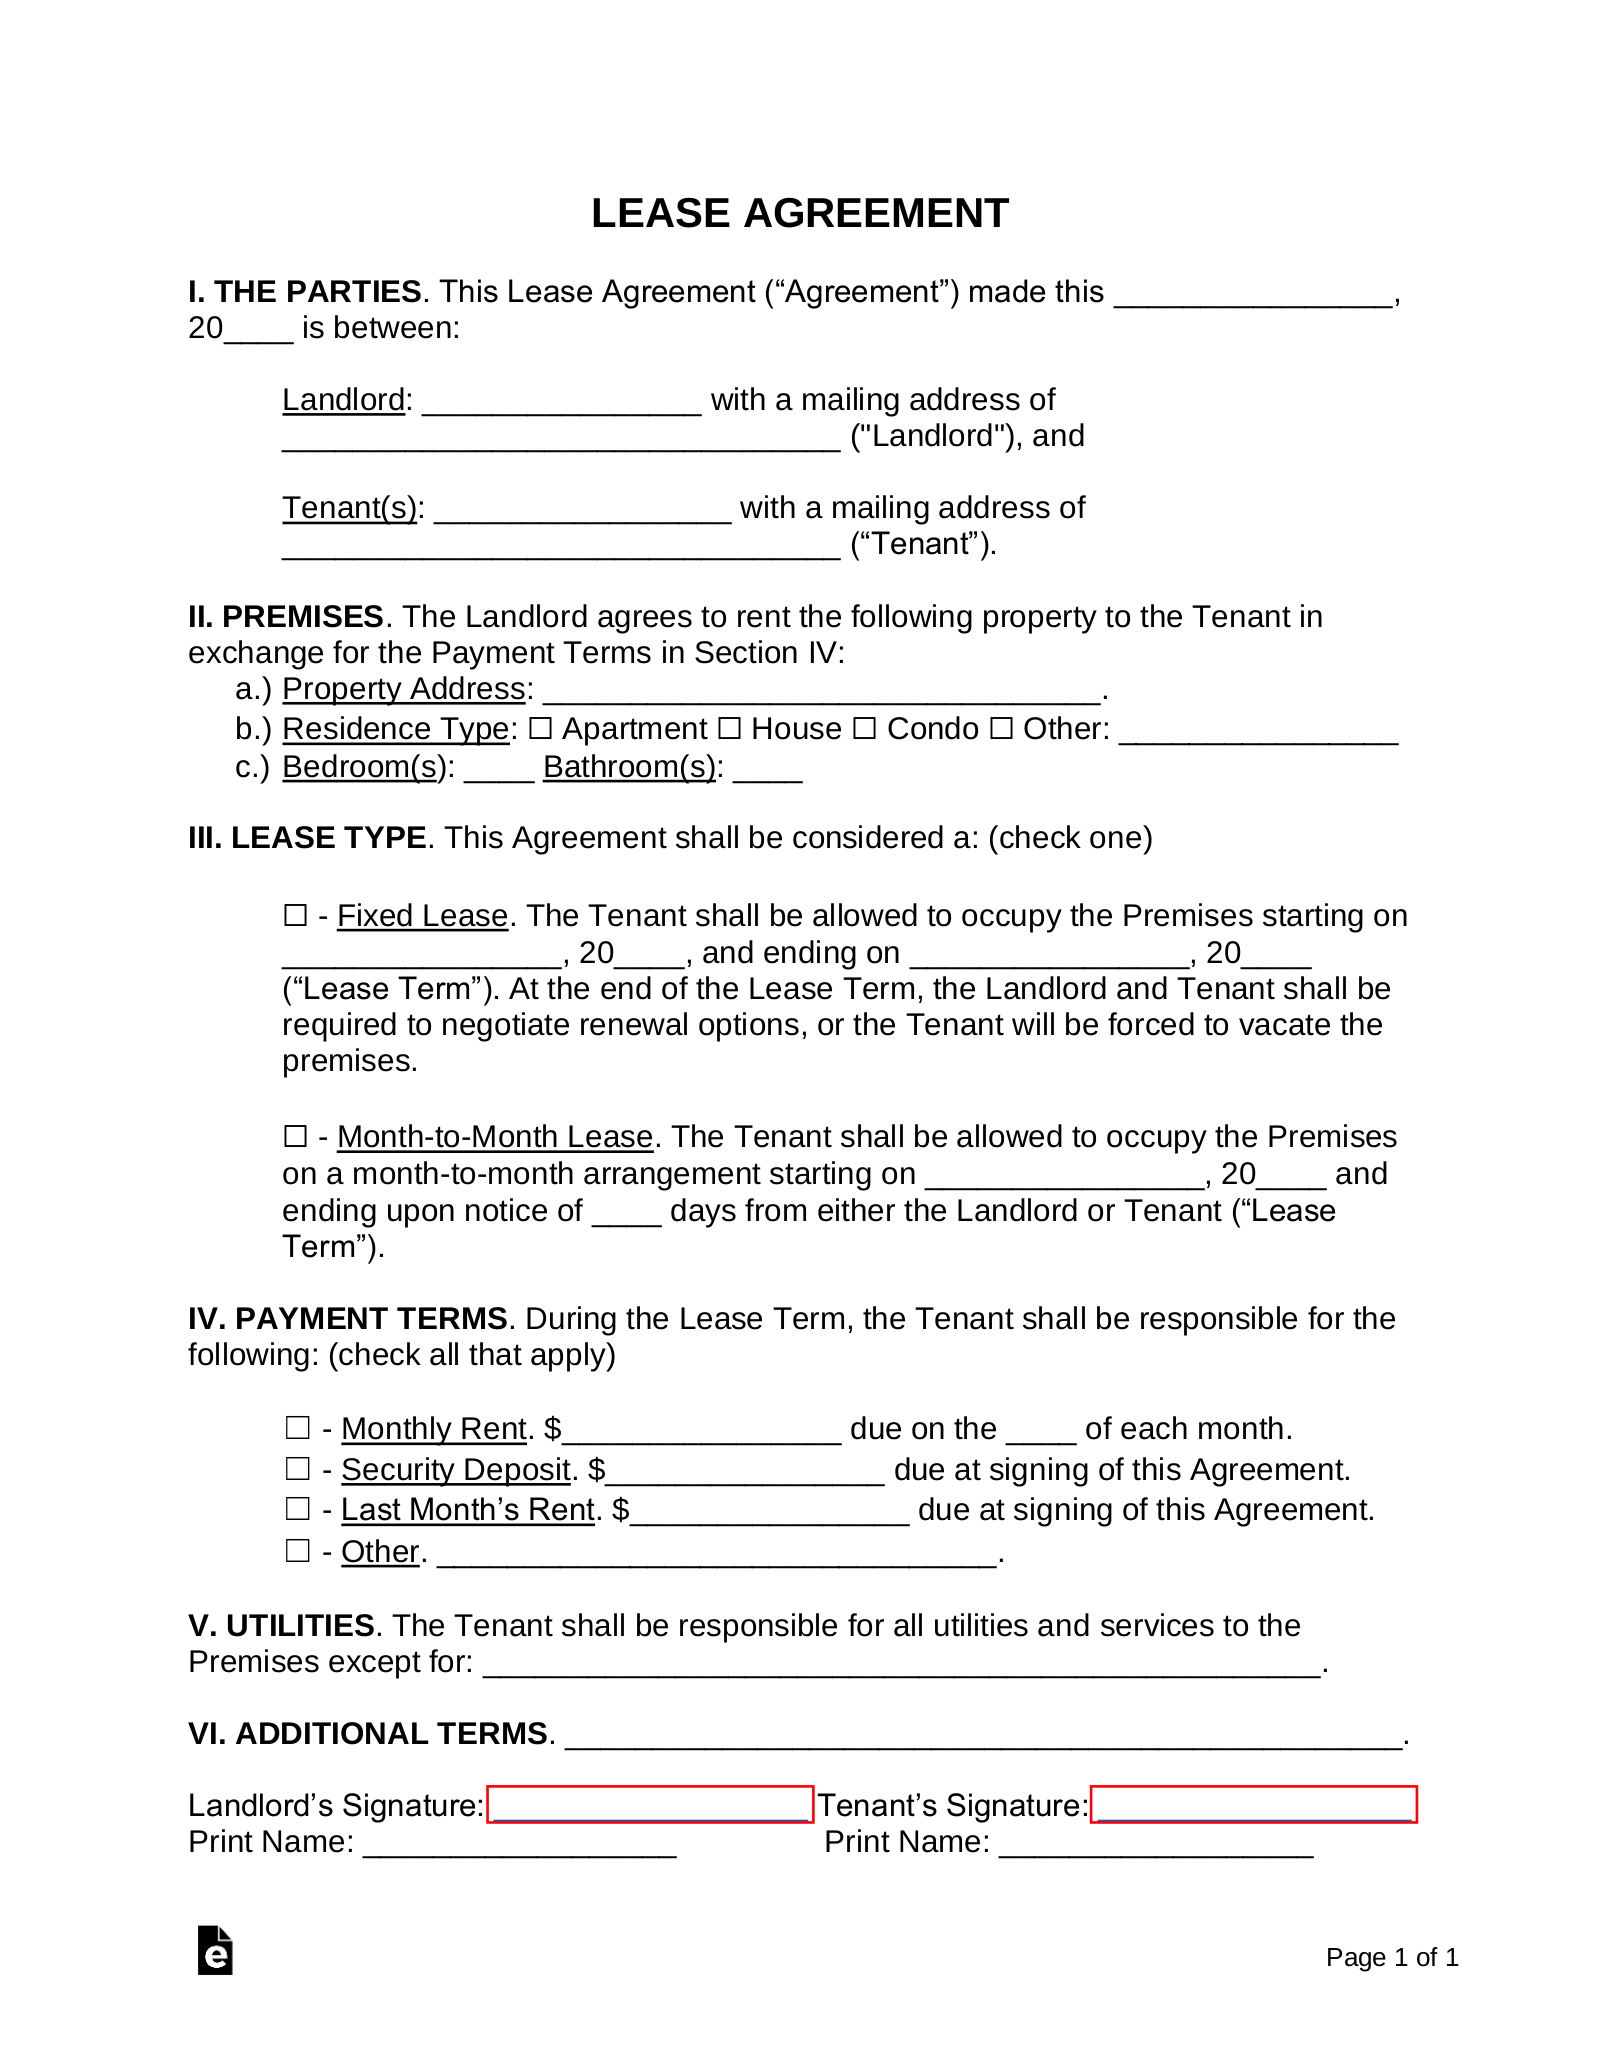 Free Simple 1-Page Lease Agreement Template | Sample - Pdf | Word - Free Lease Agreement Online Printable